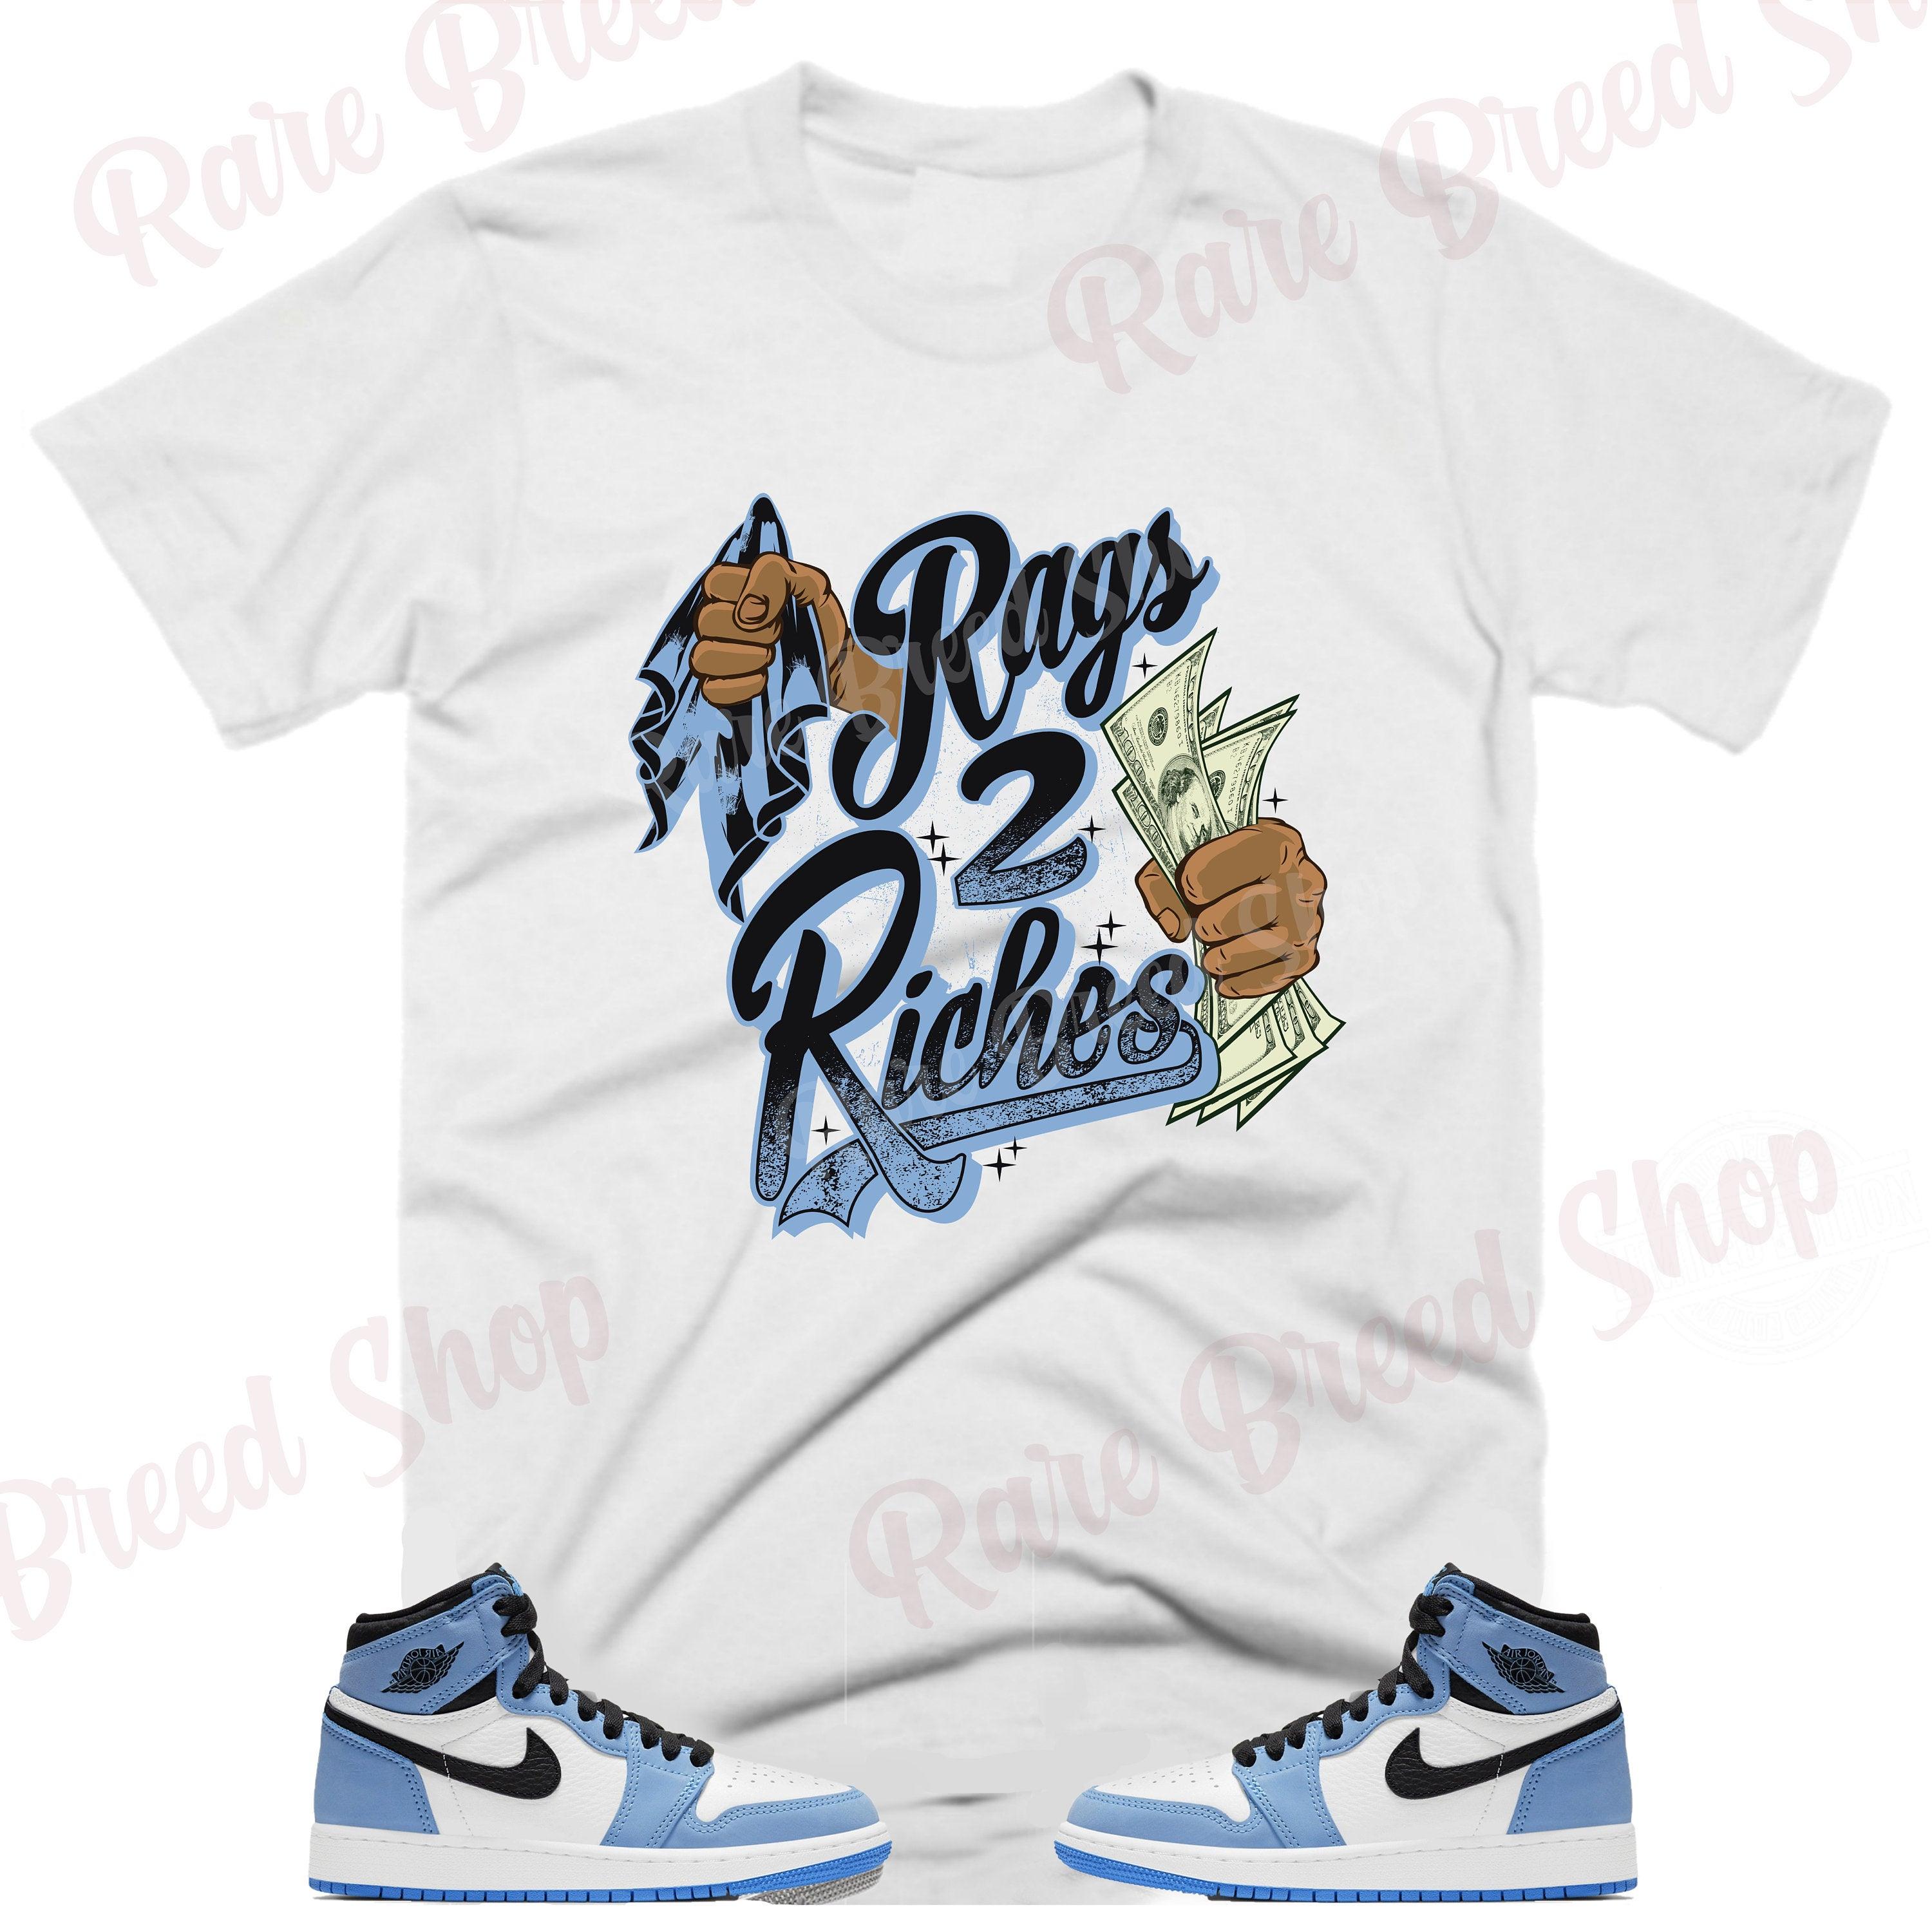 Rags To Riches Shirt